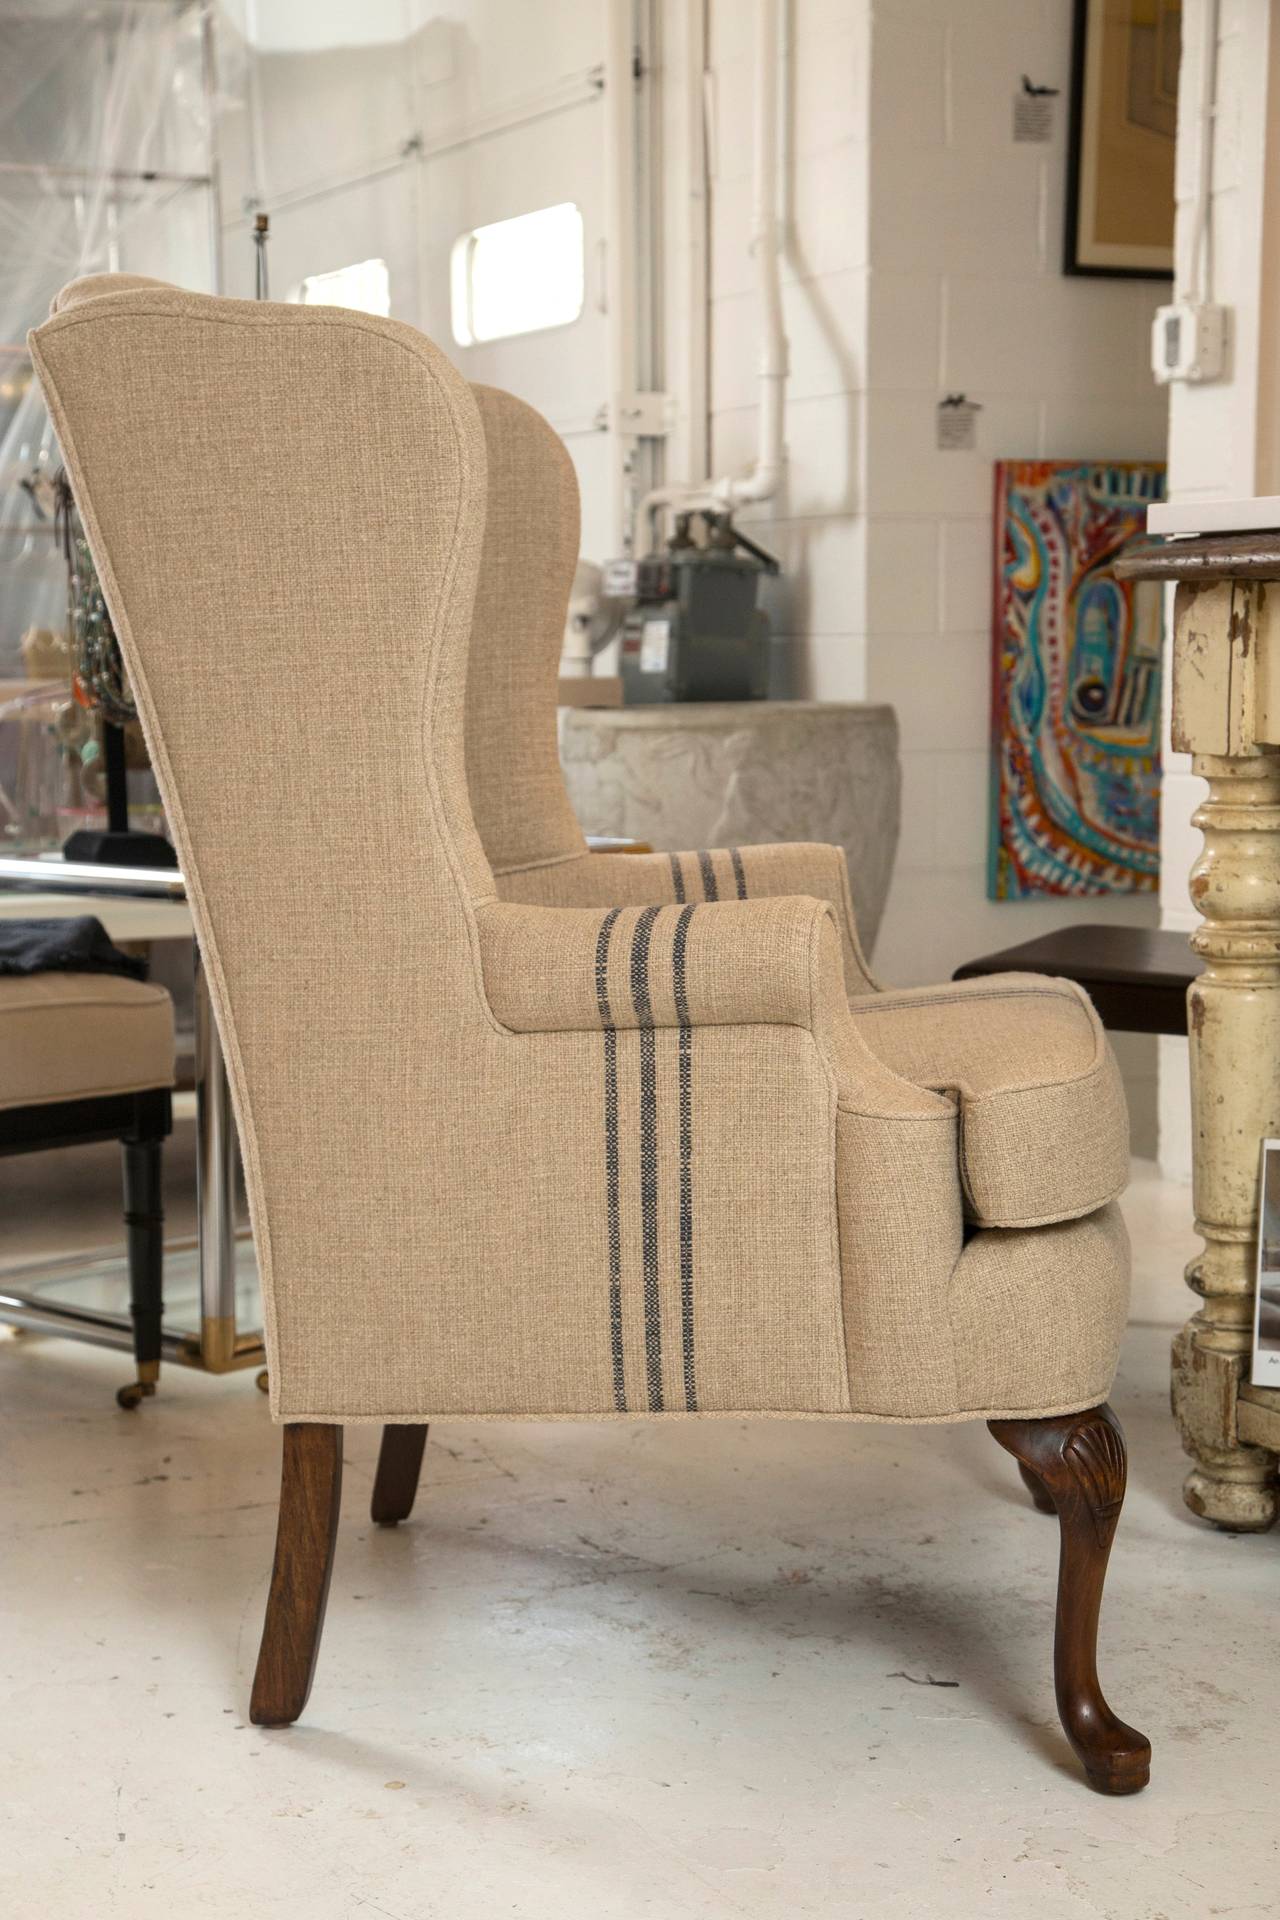 American Classic Mid-Century Wing Chair